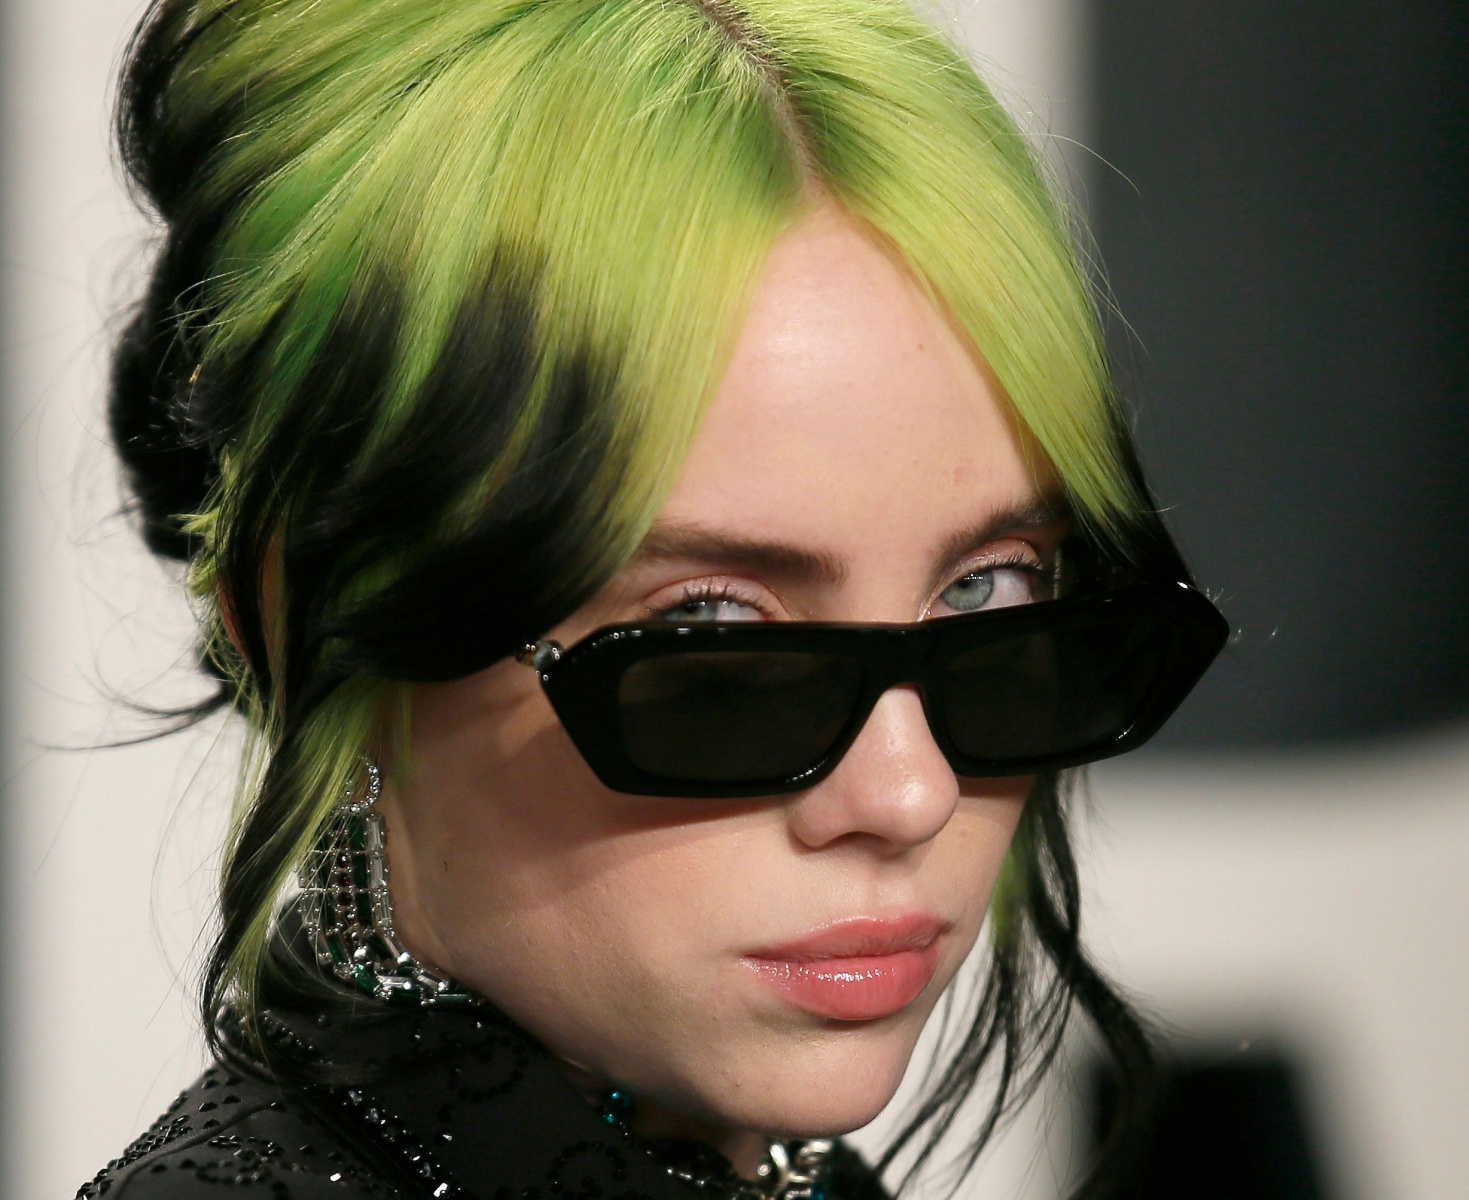 Billie Eilish's green and blue style - wide 5